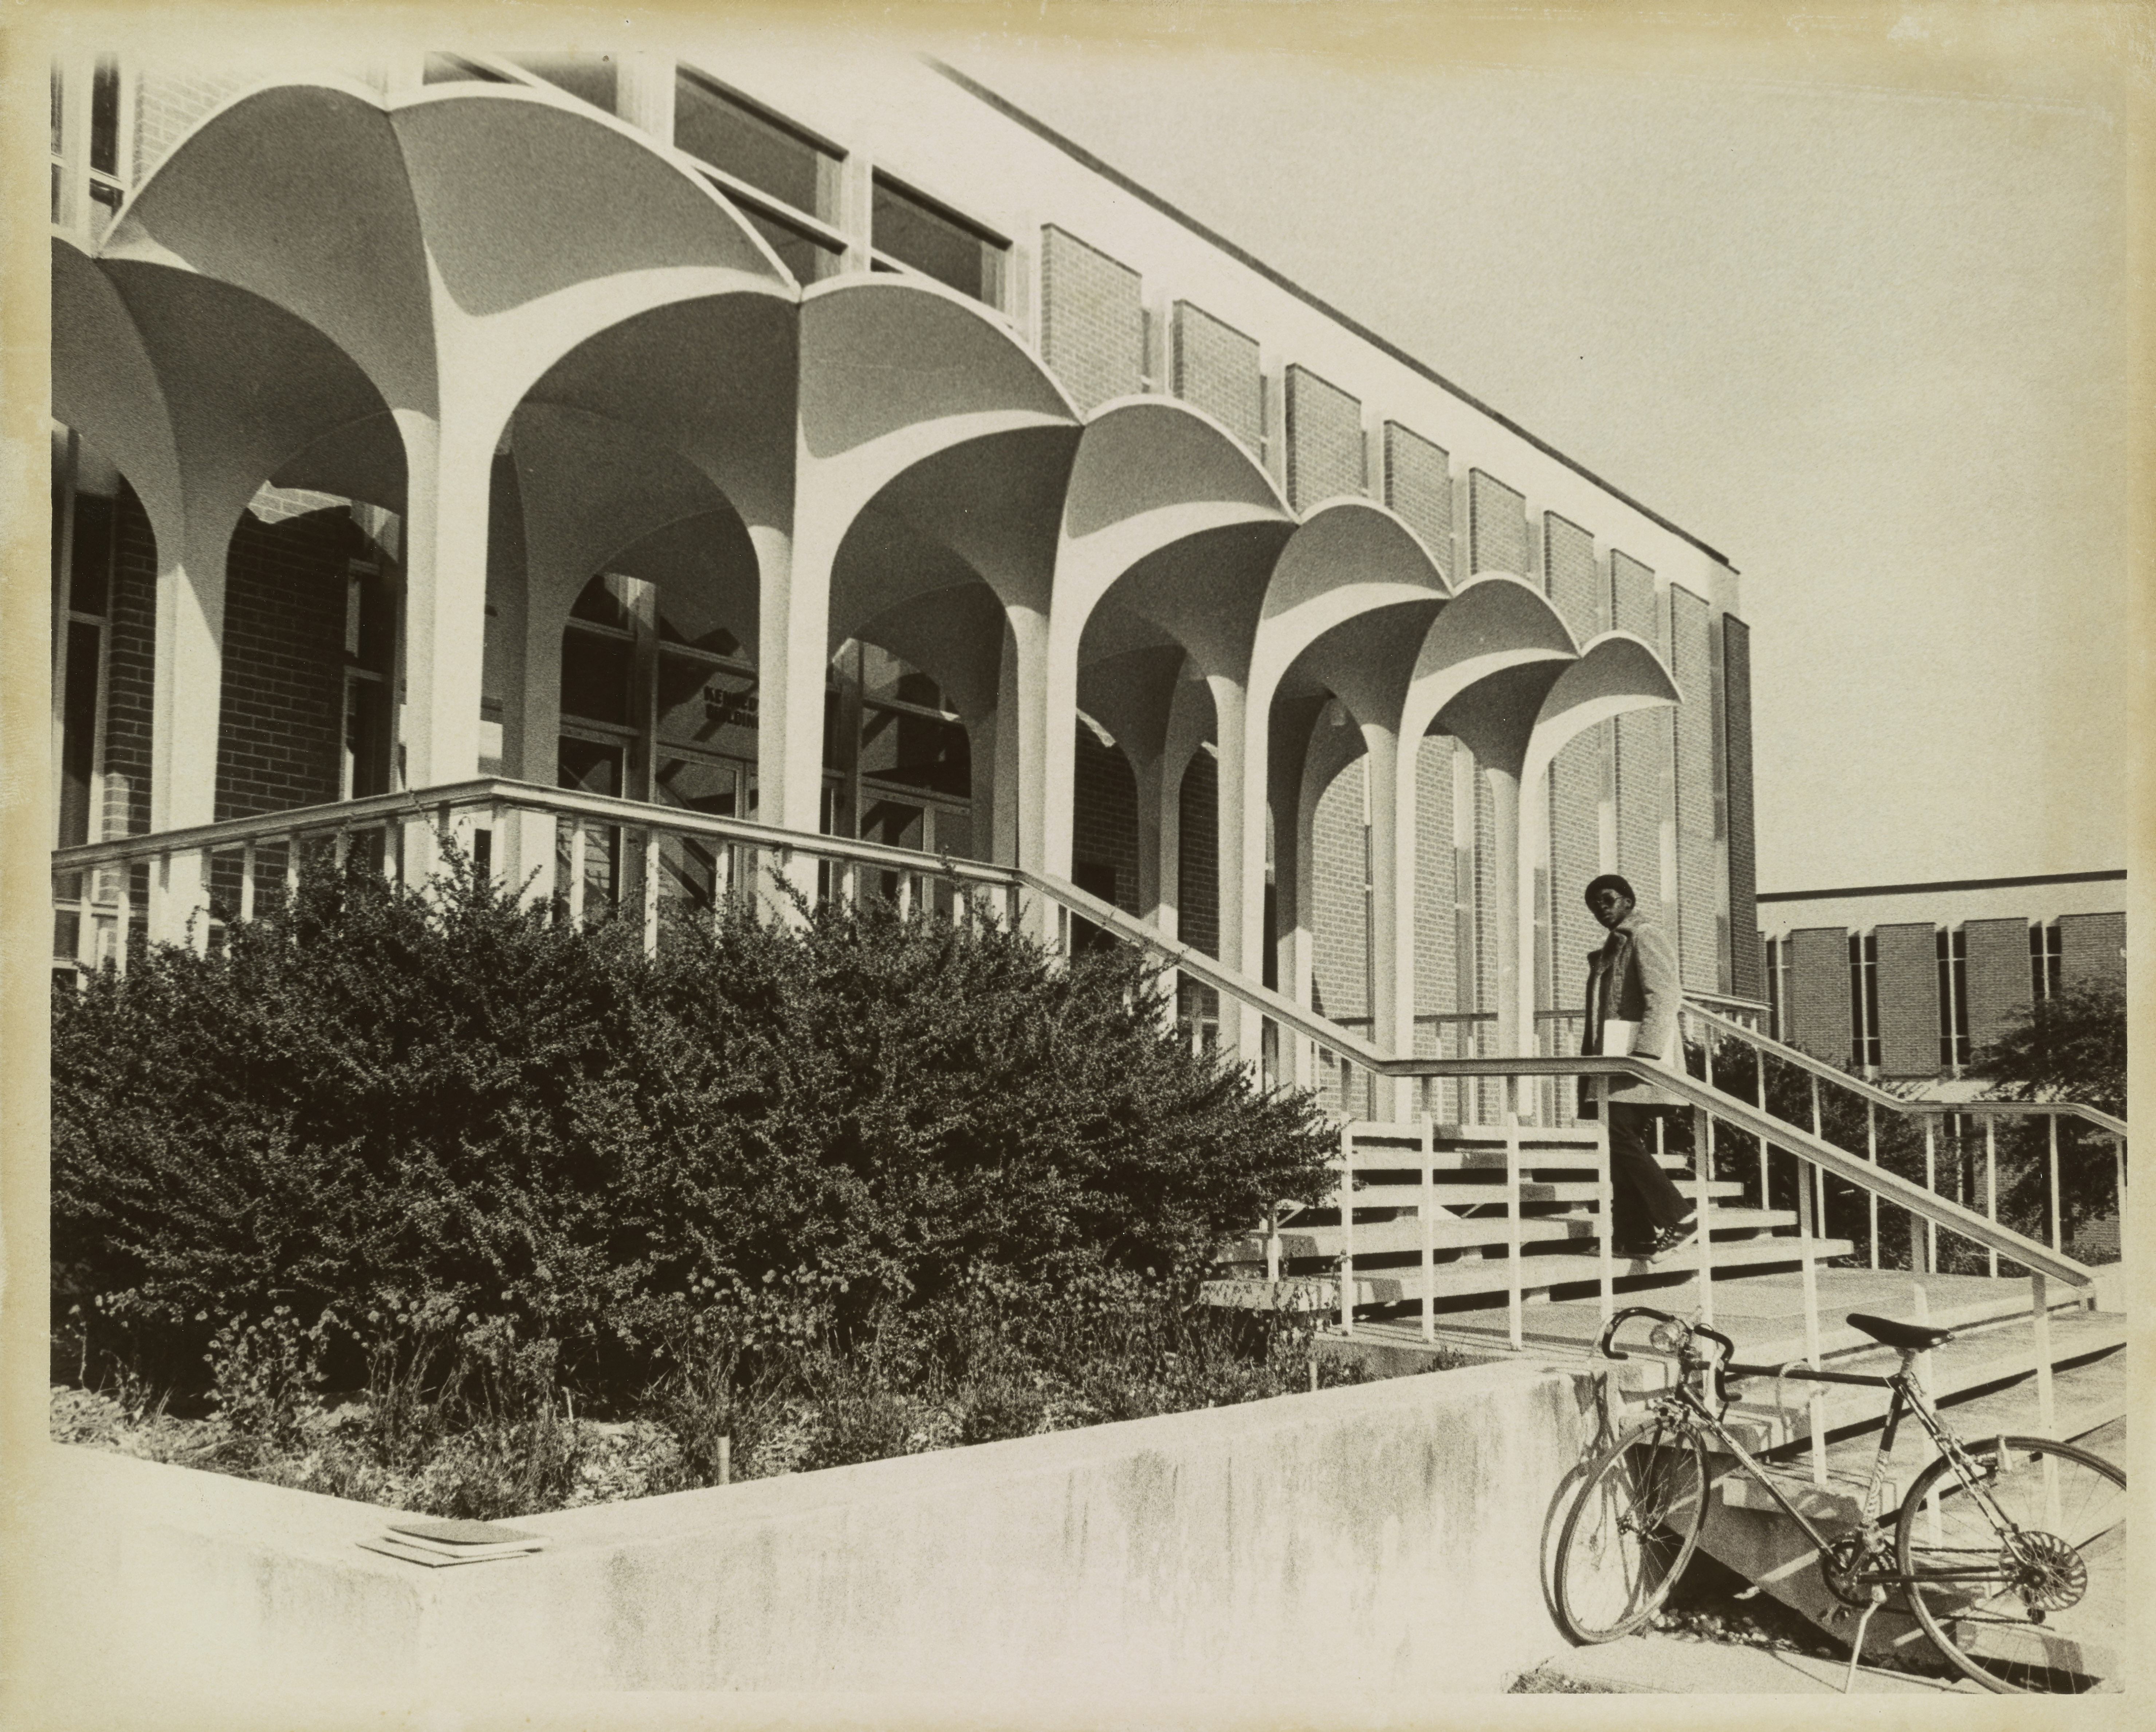 The Kennedy Building with a student on the steps. Undated, black and white image.